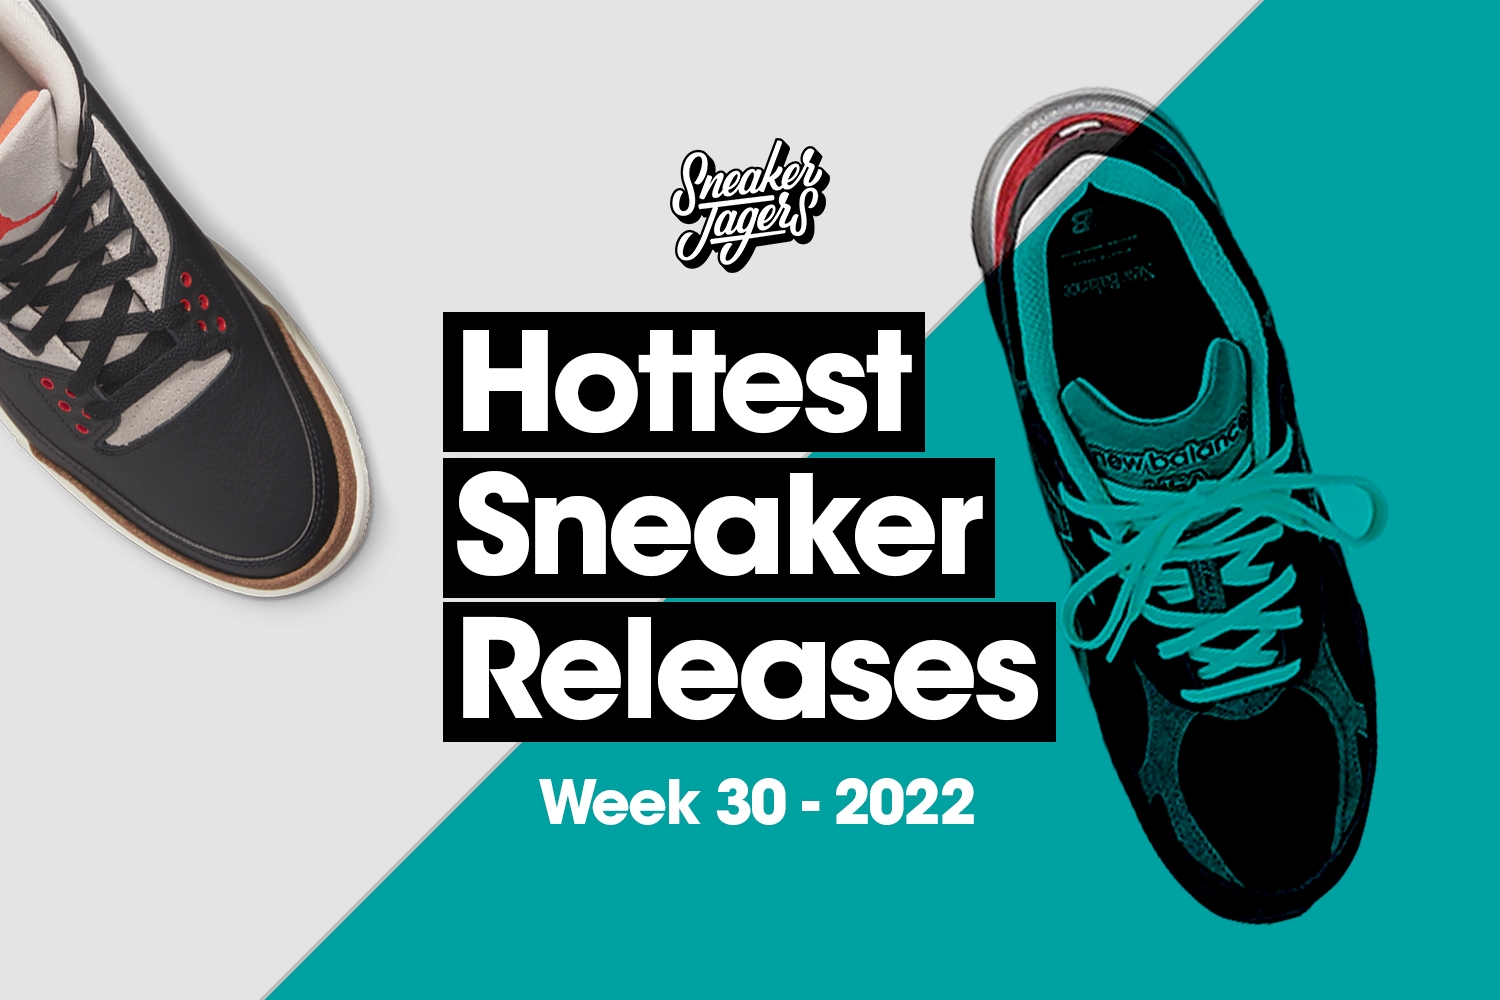 Hottest Sneaker Releases - WK 30